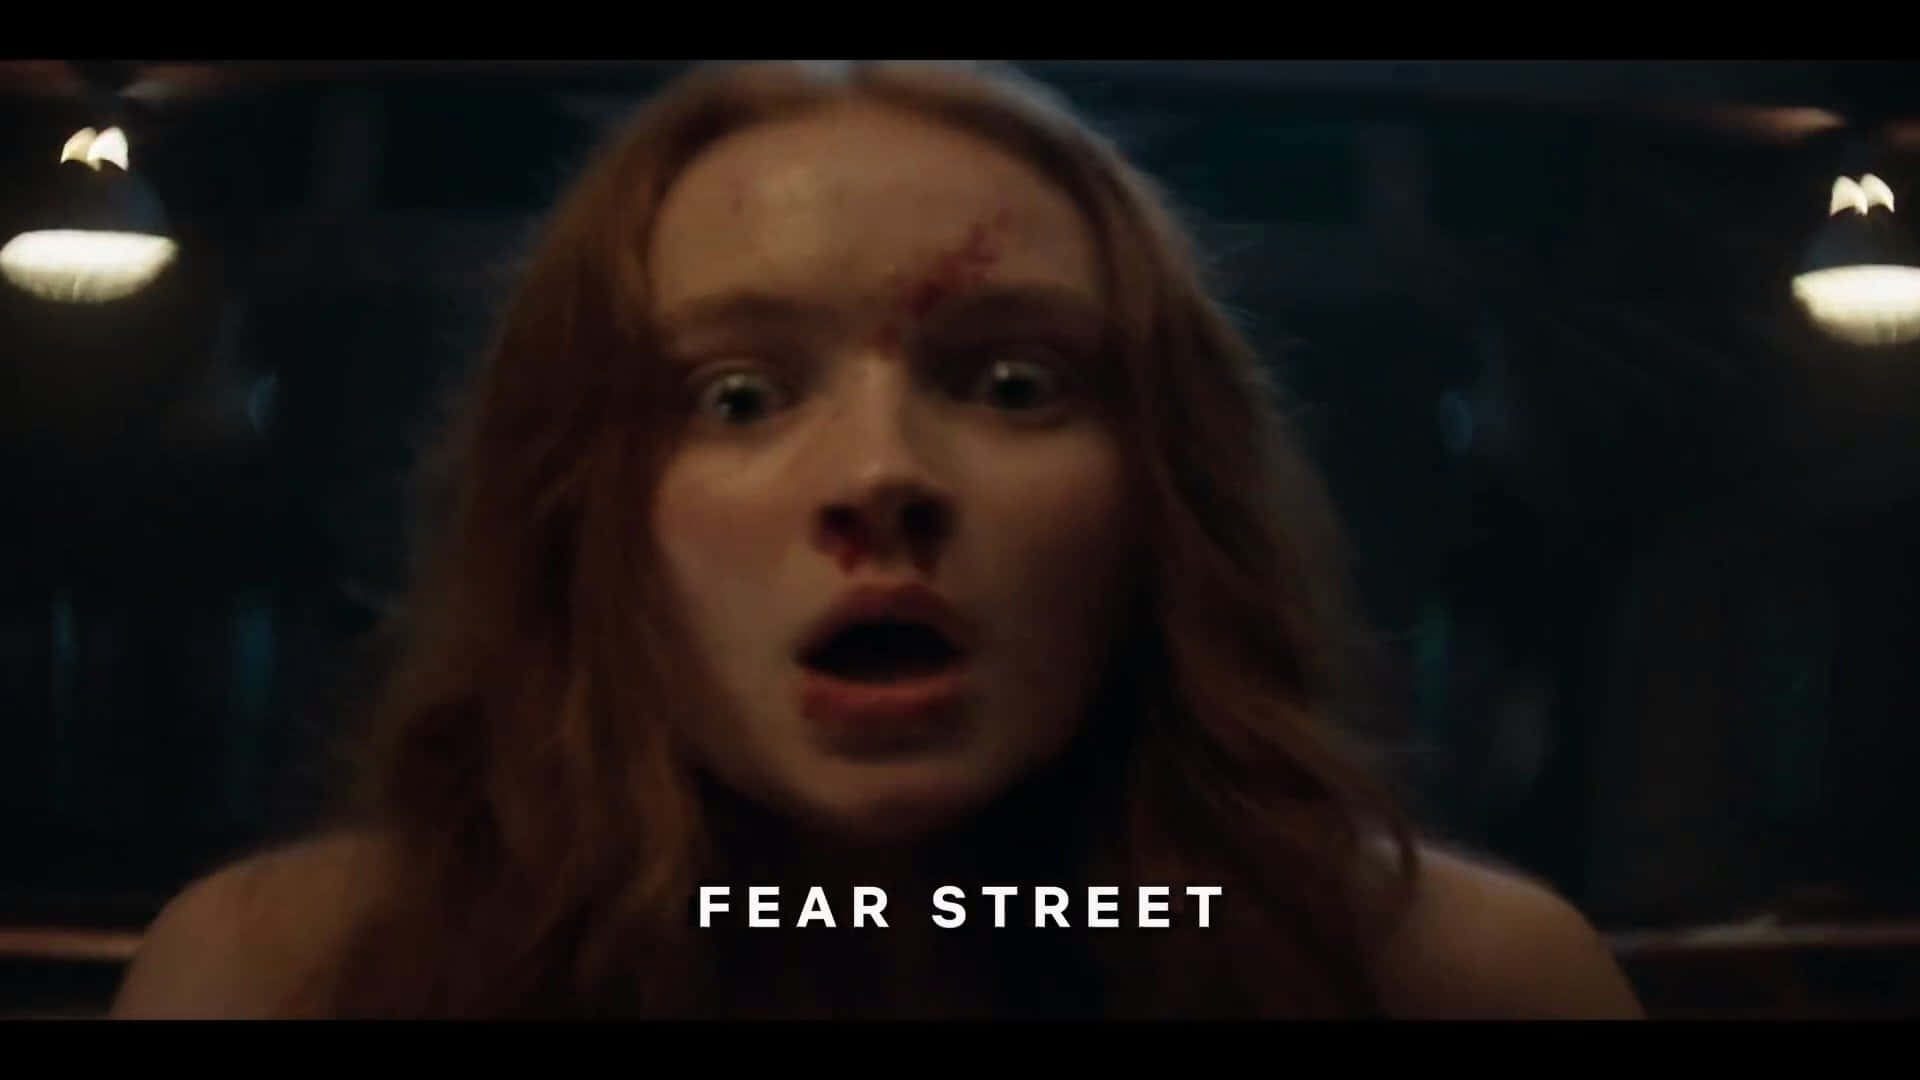 "Welcome to Fear Street, Where darkness and terror lurk around every corner" Wallpaper